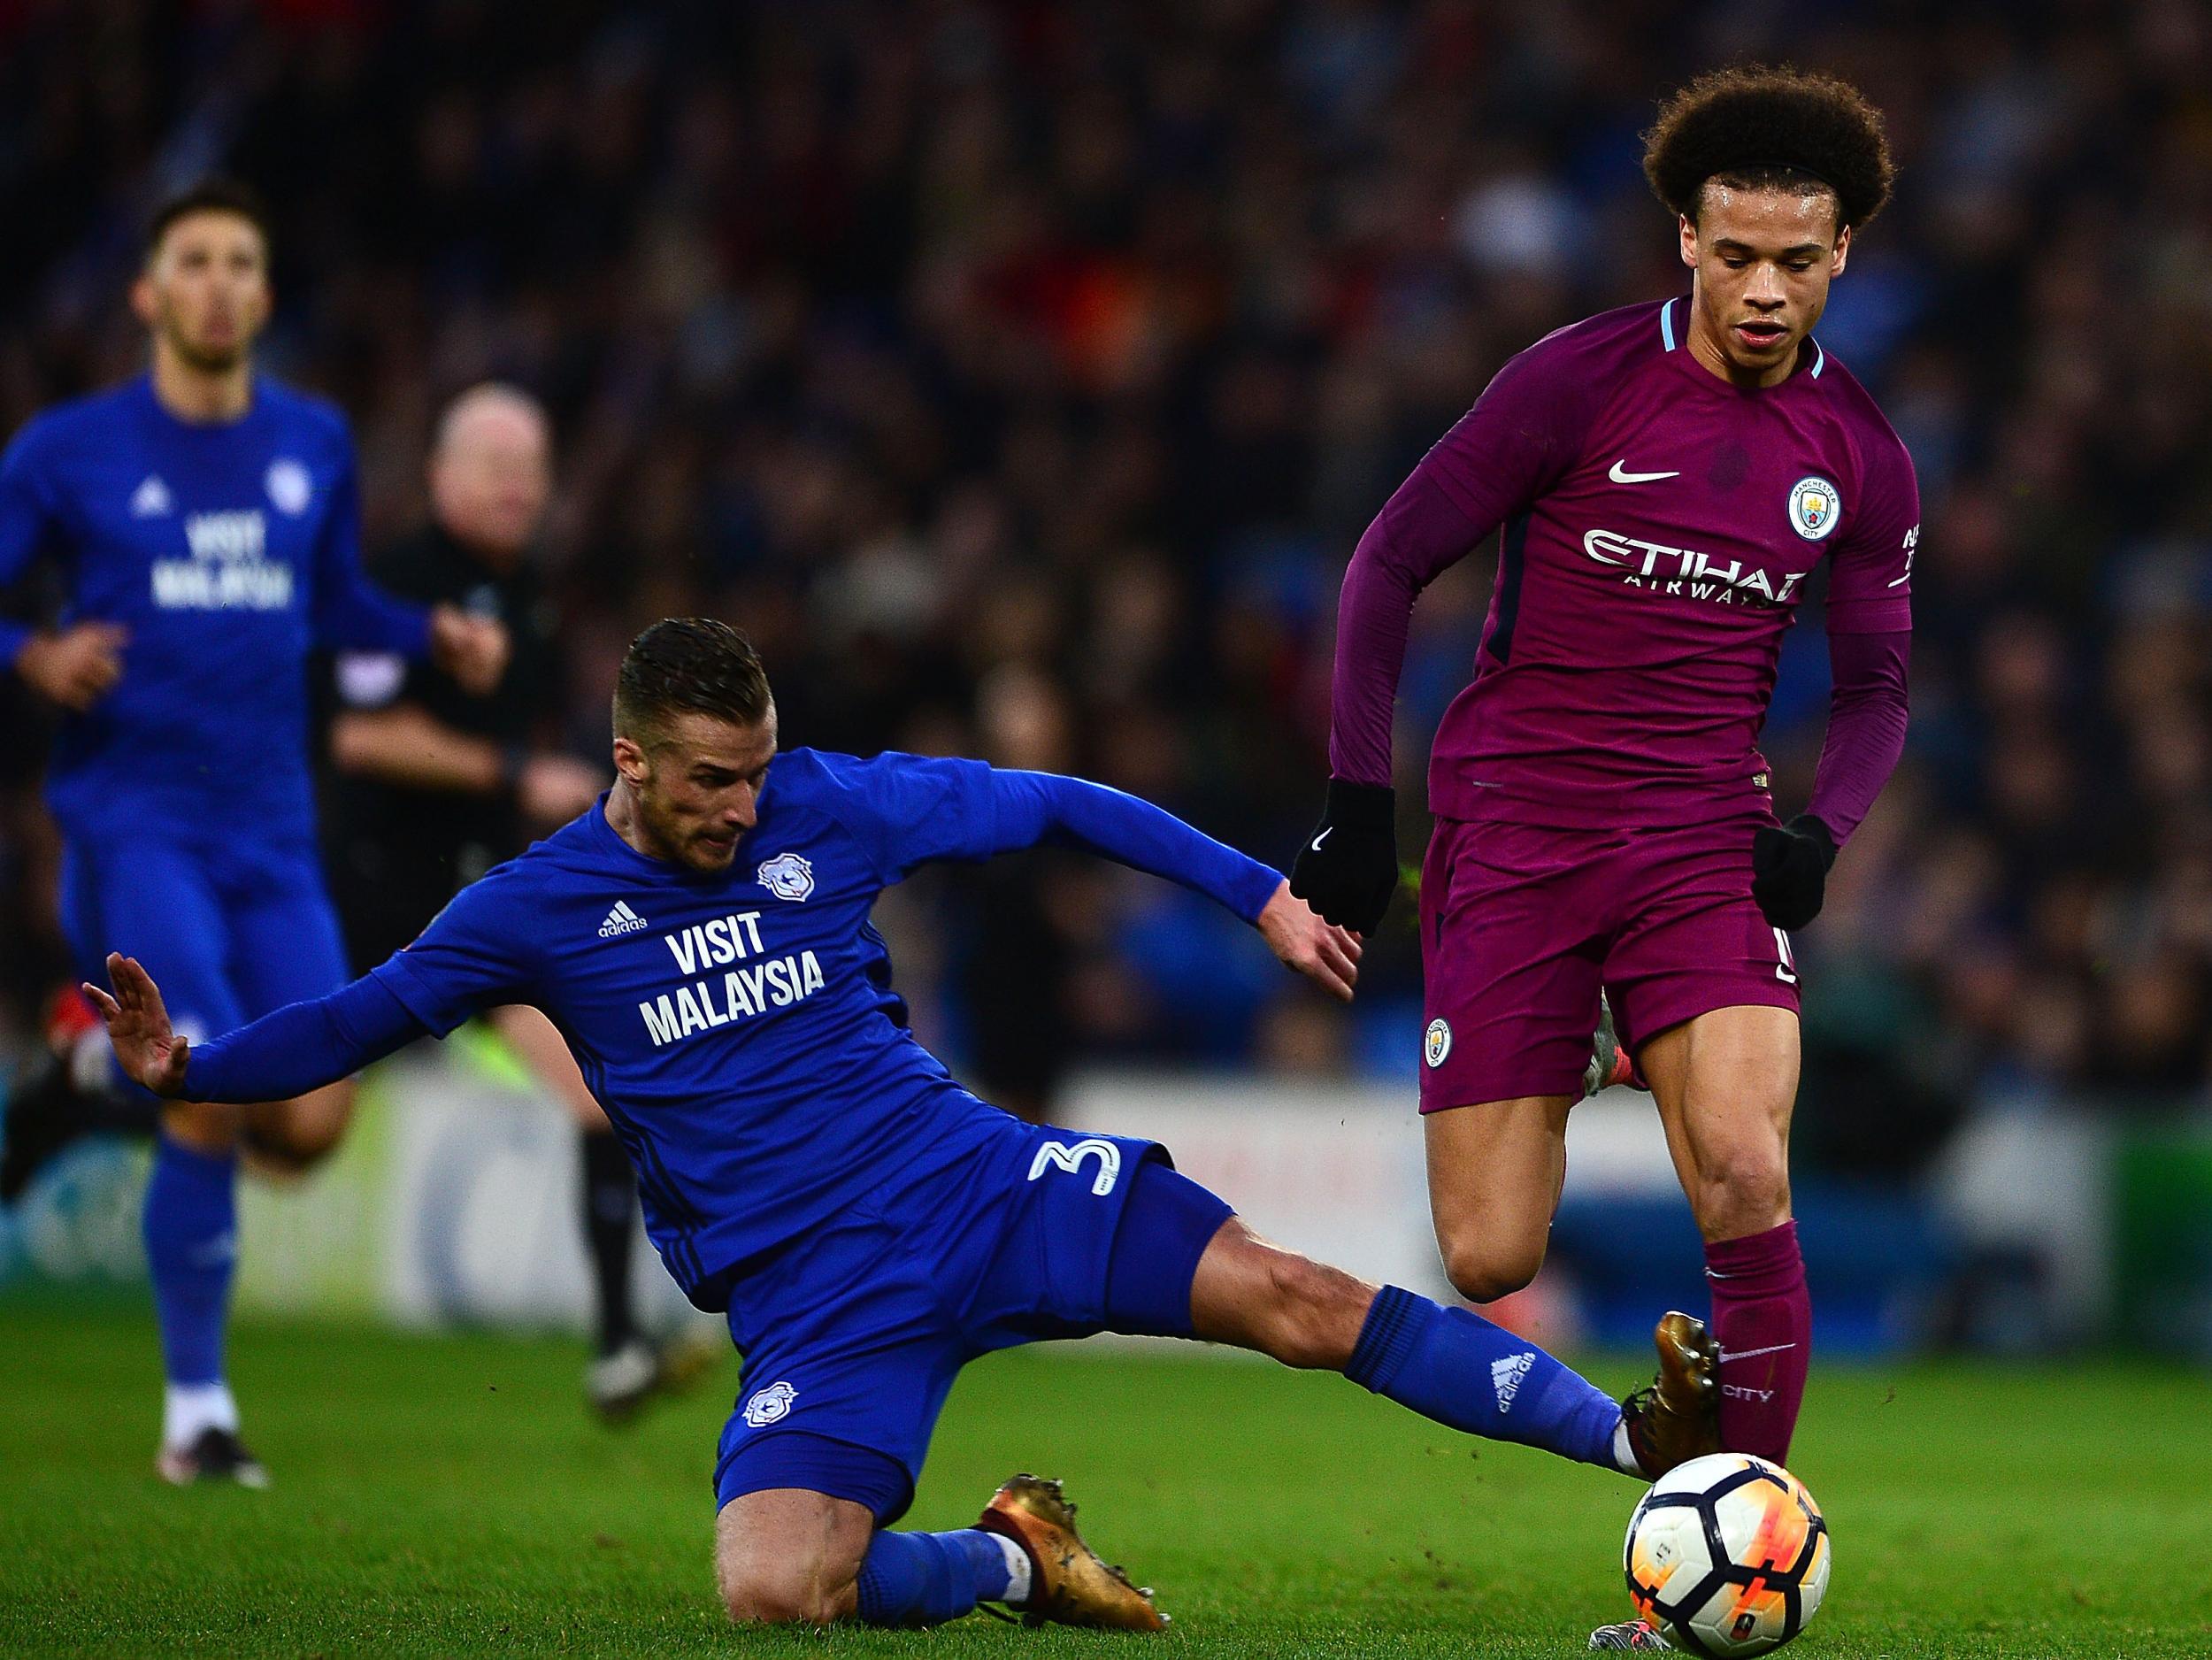 Leroy Sane was one of a number of City players on the receiving end of tackles